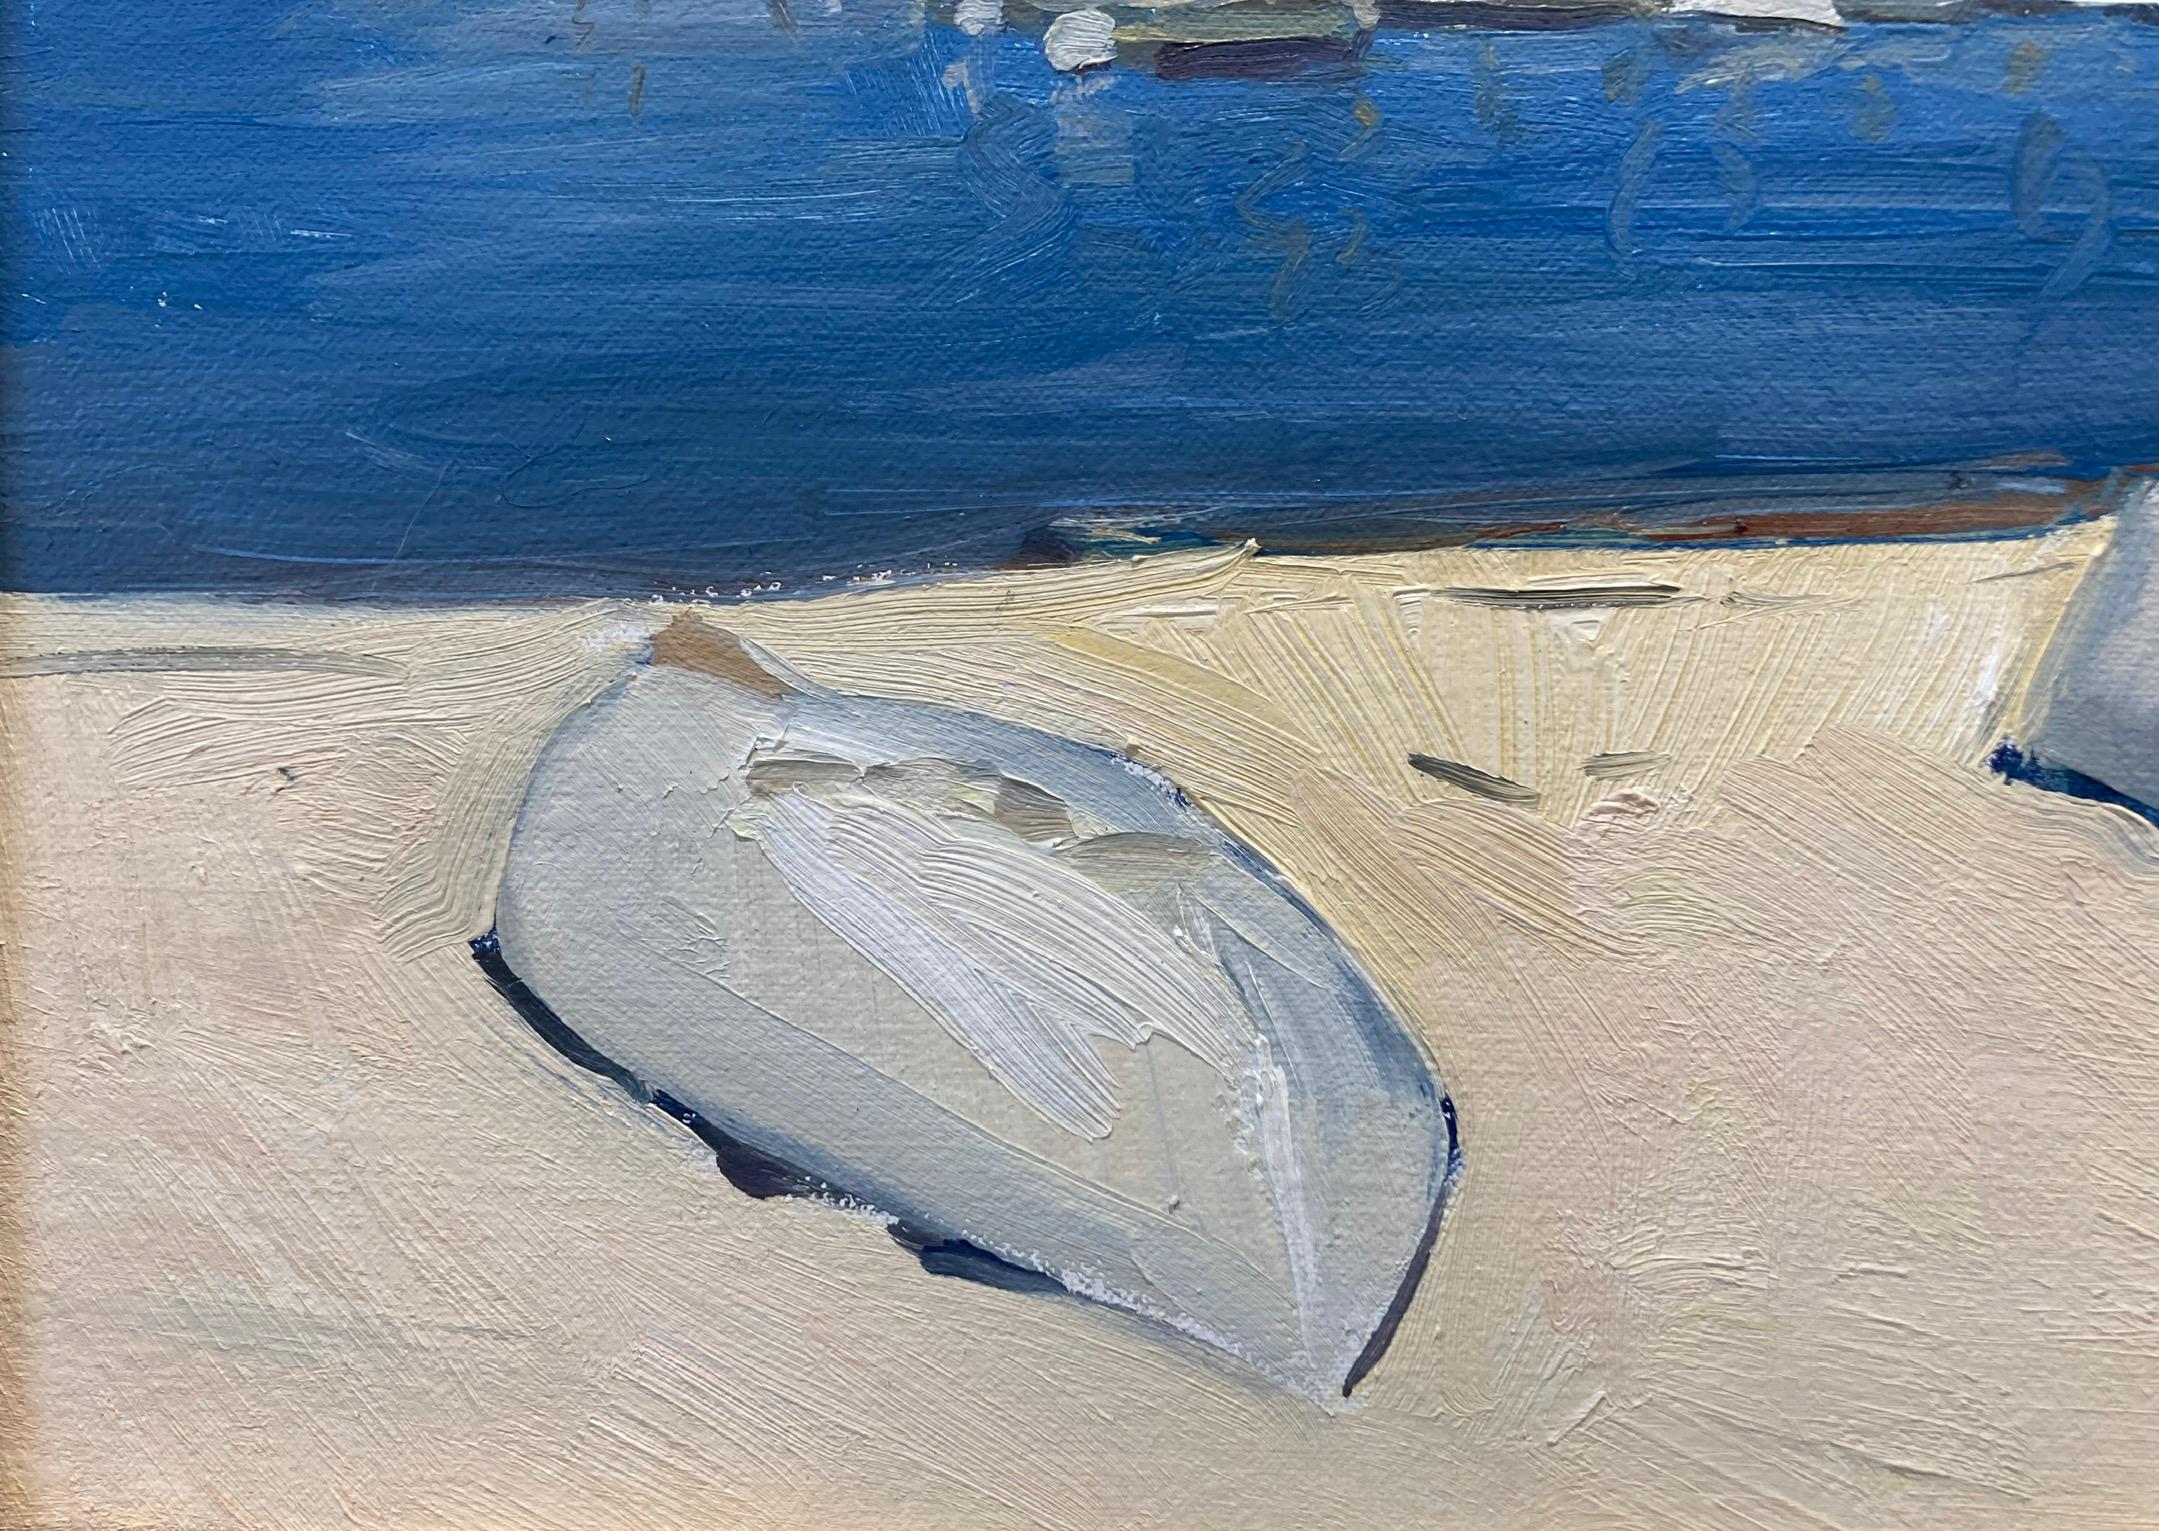 The Boats on the Beach, Sag Harbor (Grau), Still-Life Painting, von Marc Dalessio